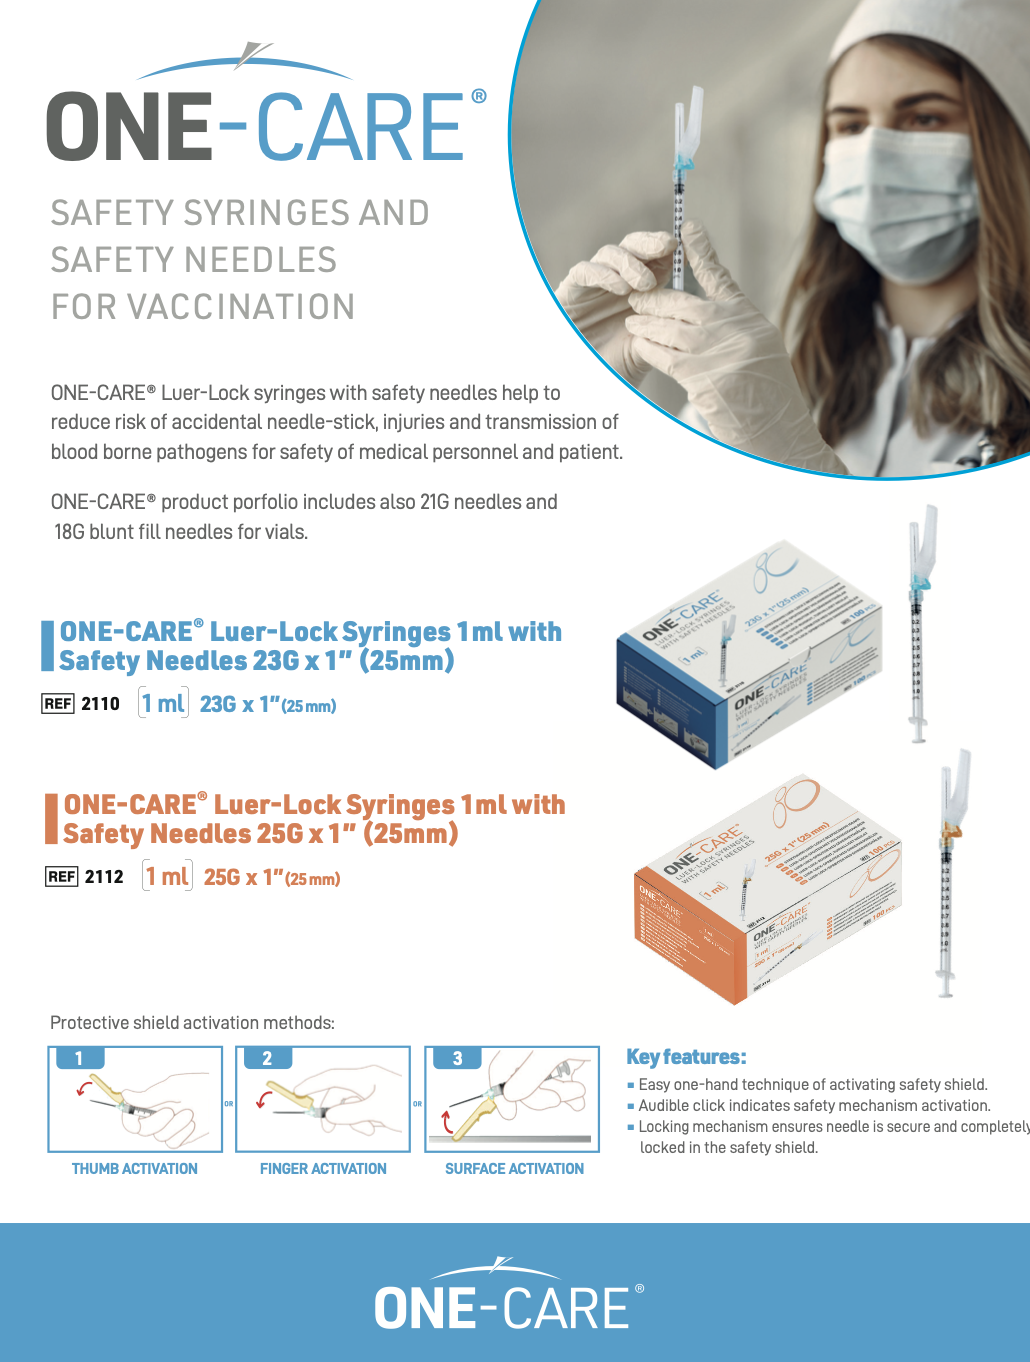 Safety Syringes and Safety Needles